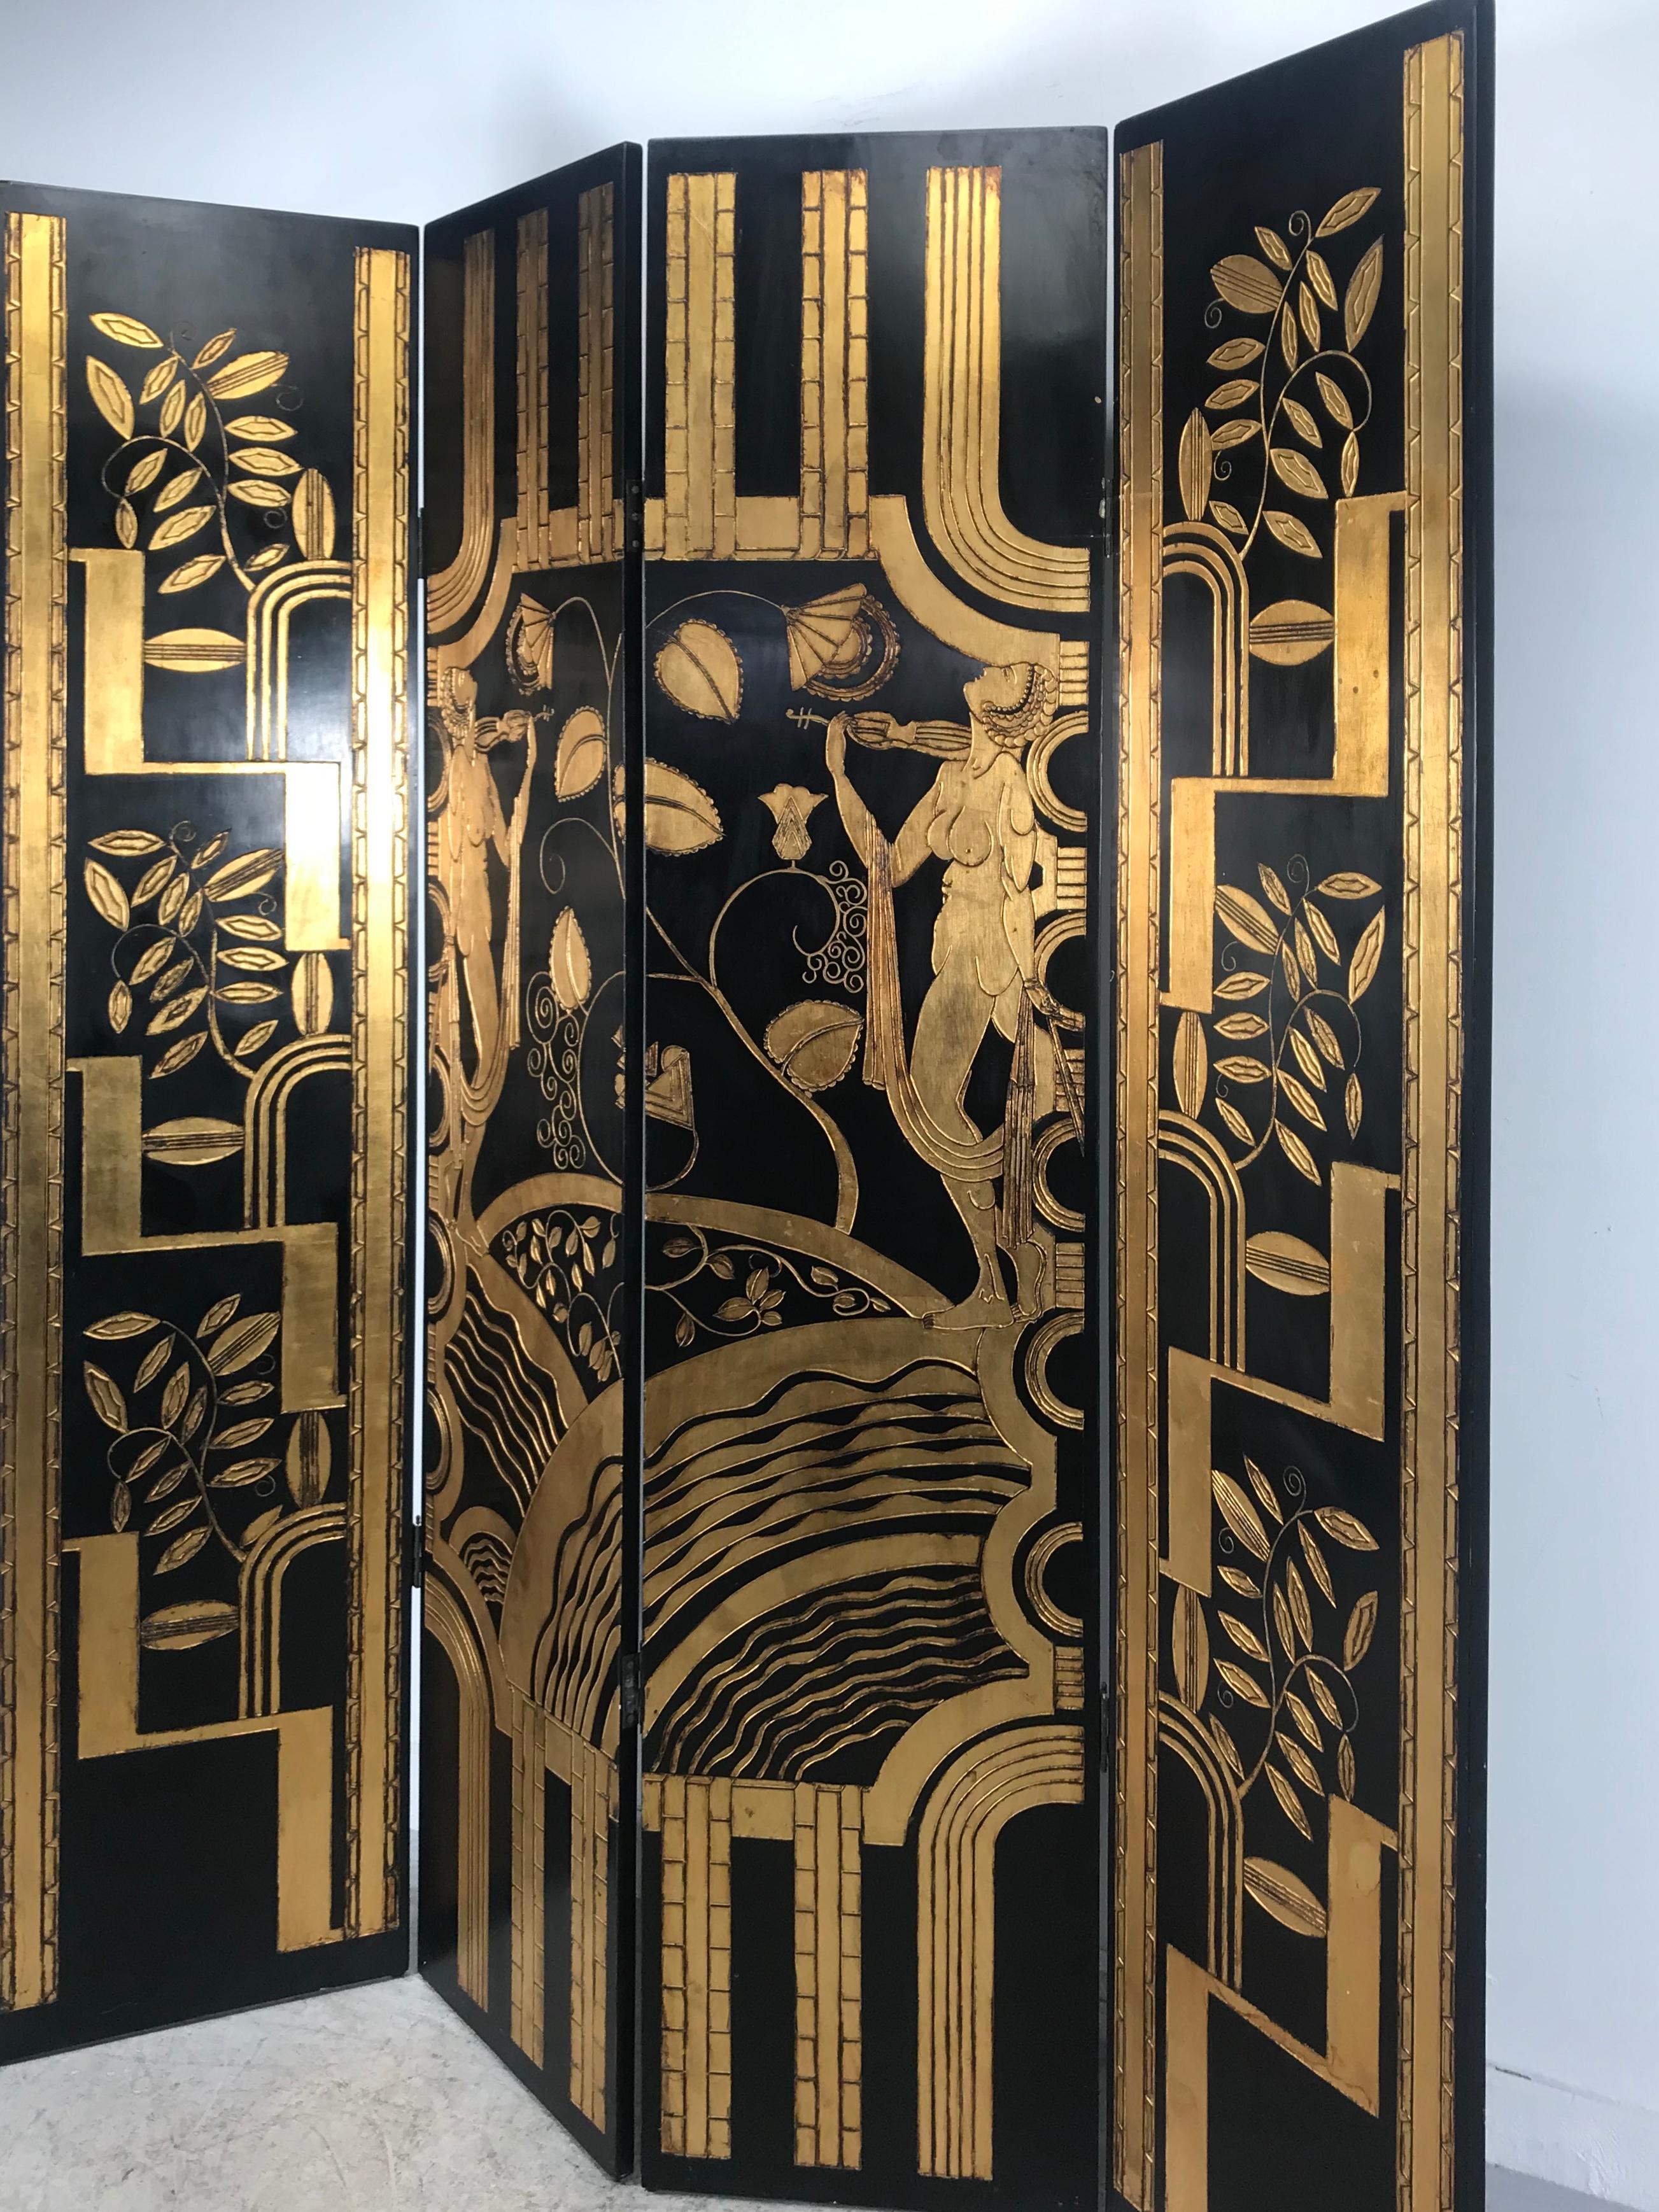 Wood Art Deco Revival 4 Panel Screen / Room Divider, Carved and Gilt, Woman Motif